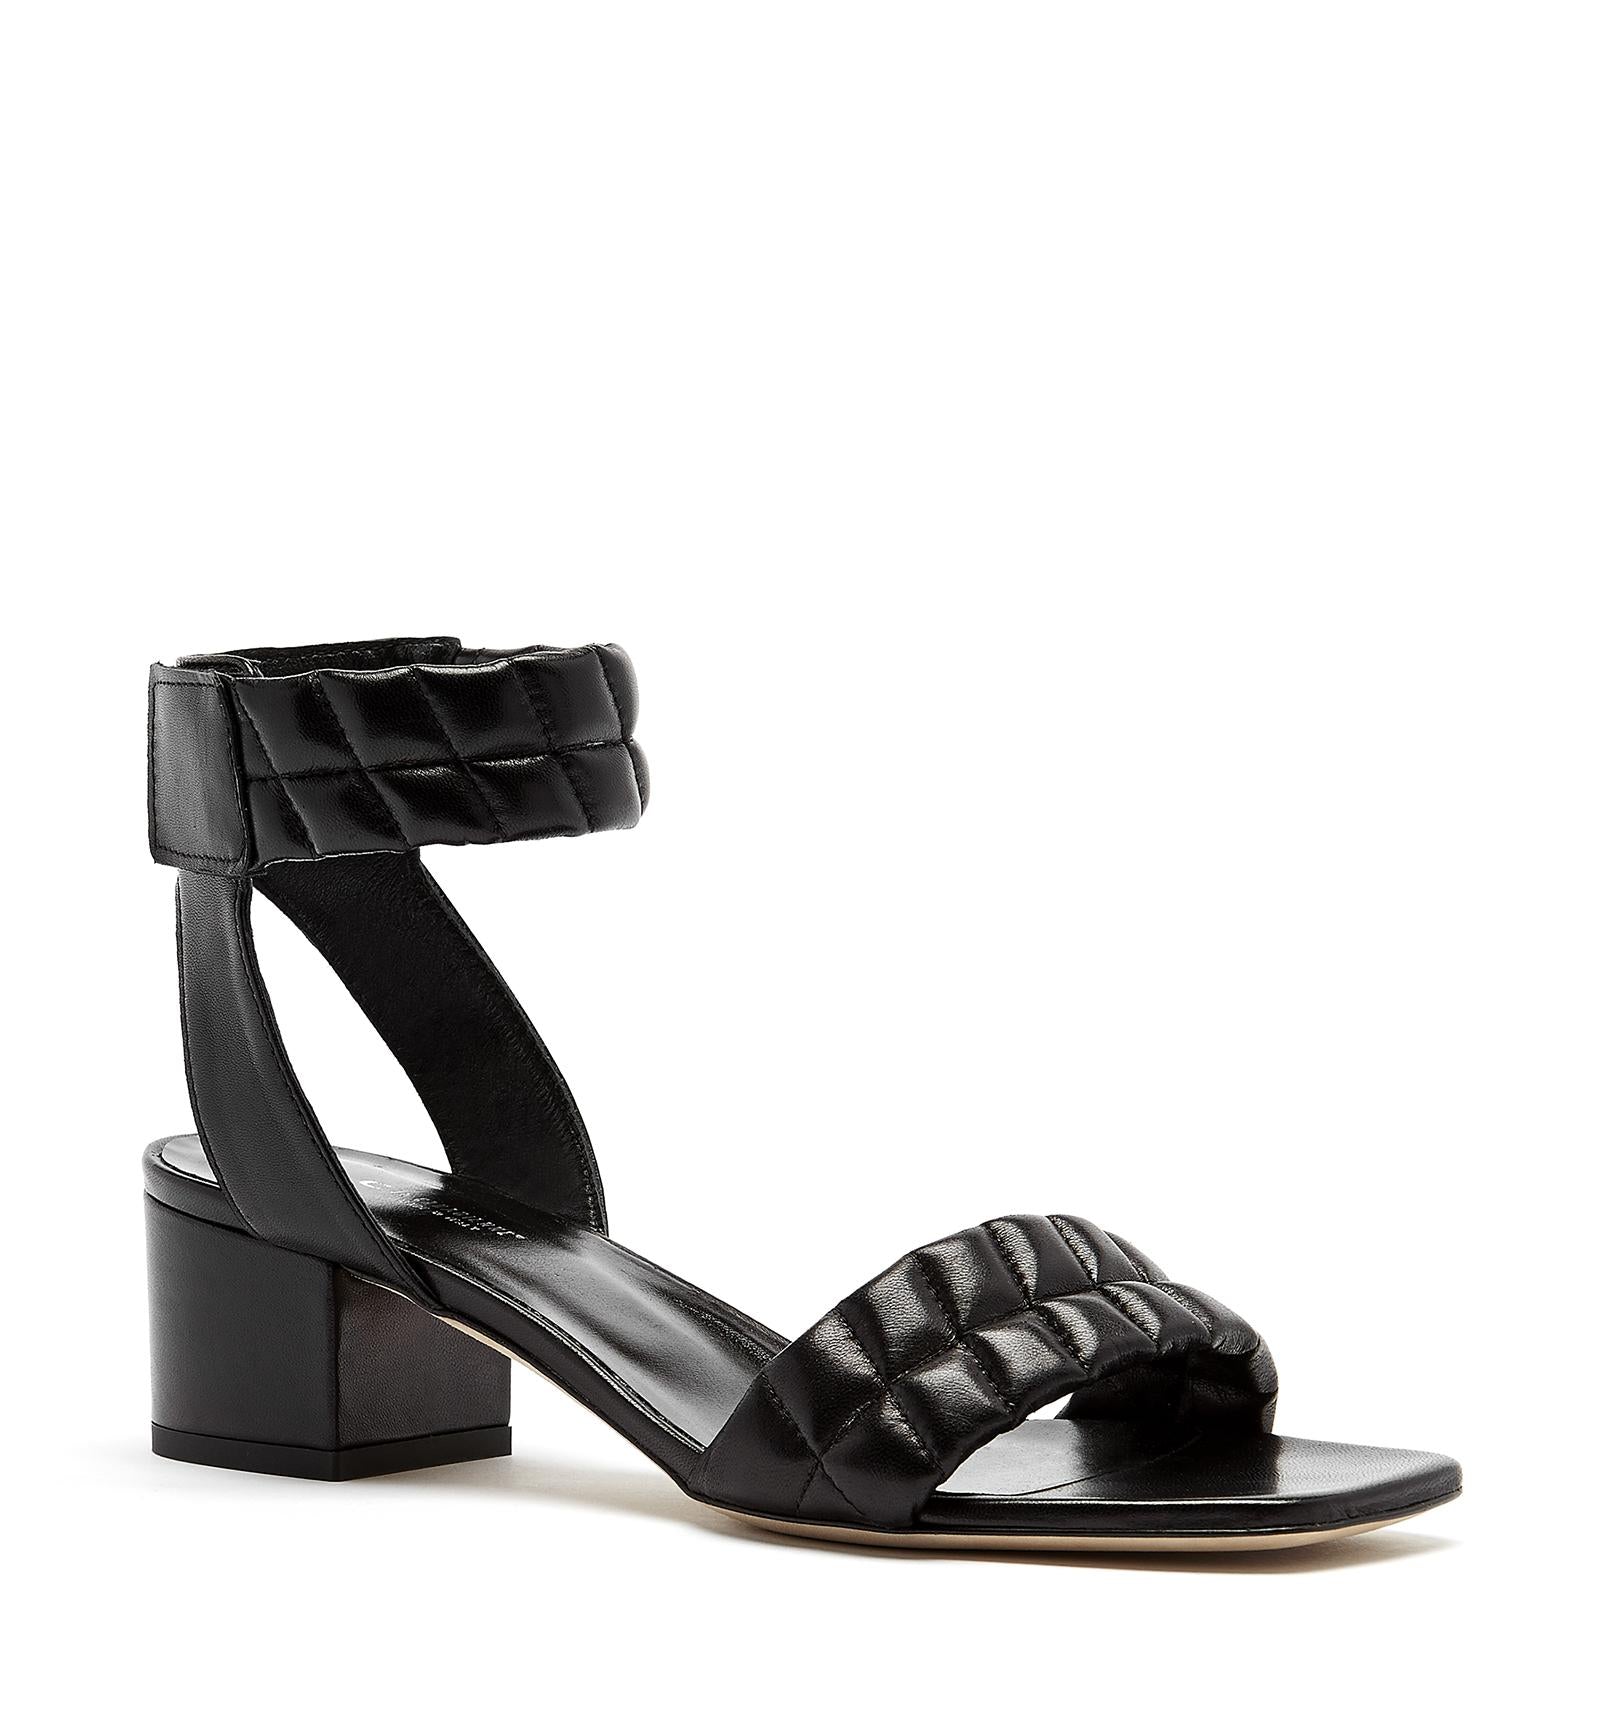 Rover Quilted Puffy Leather Sandal in Black